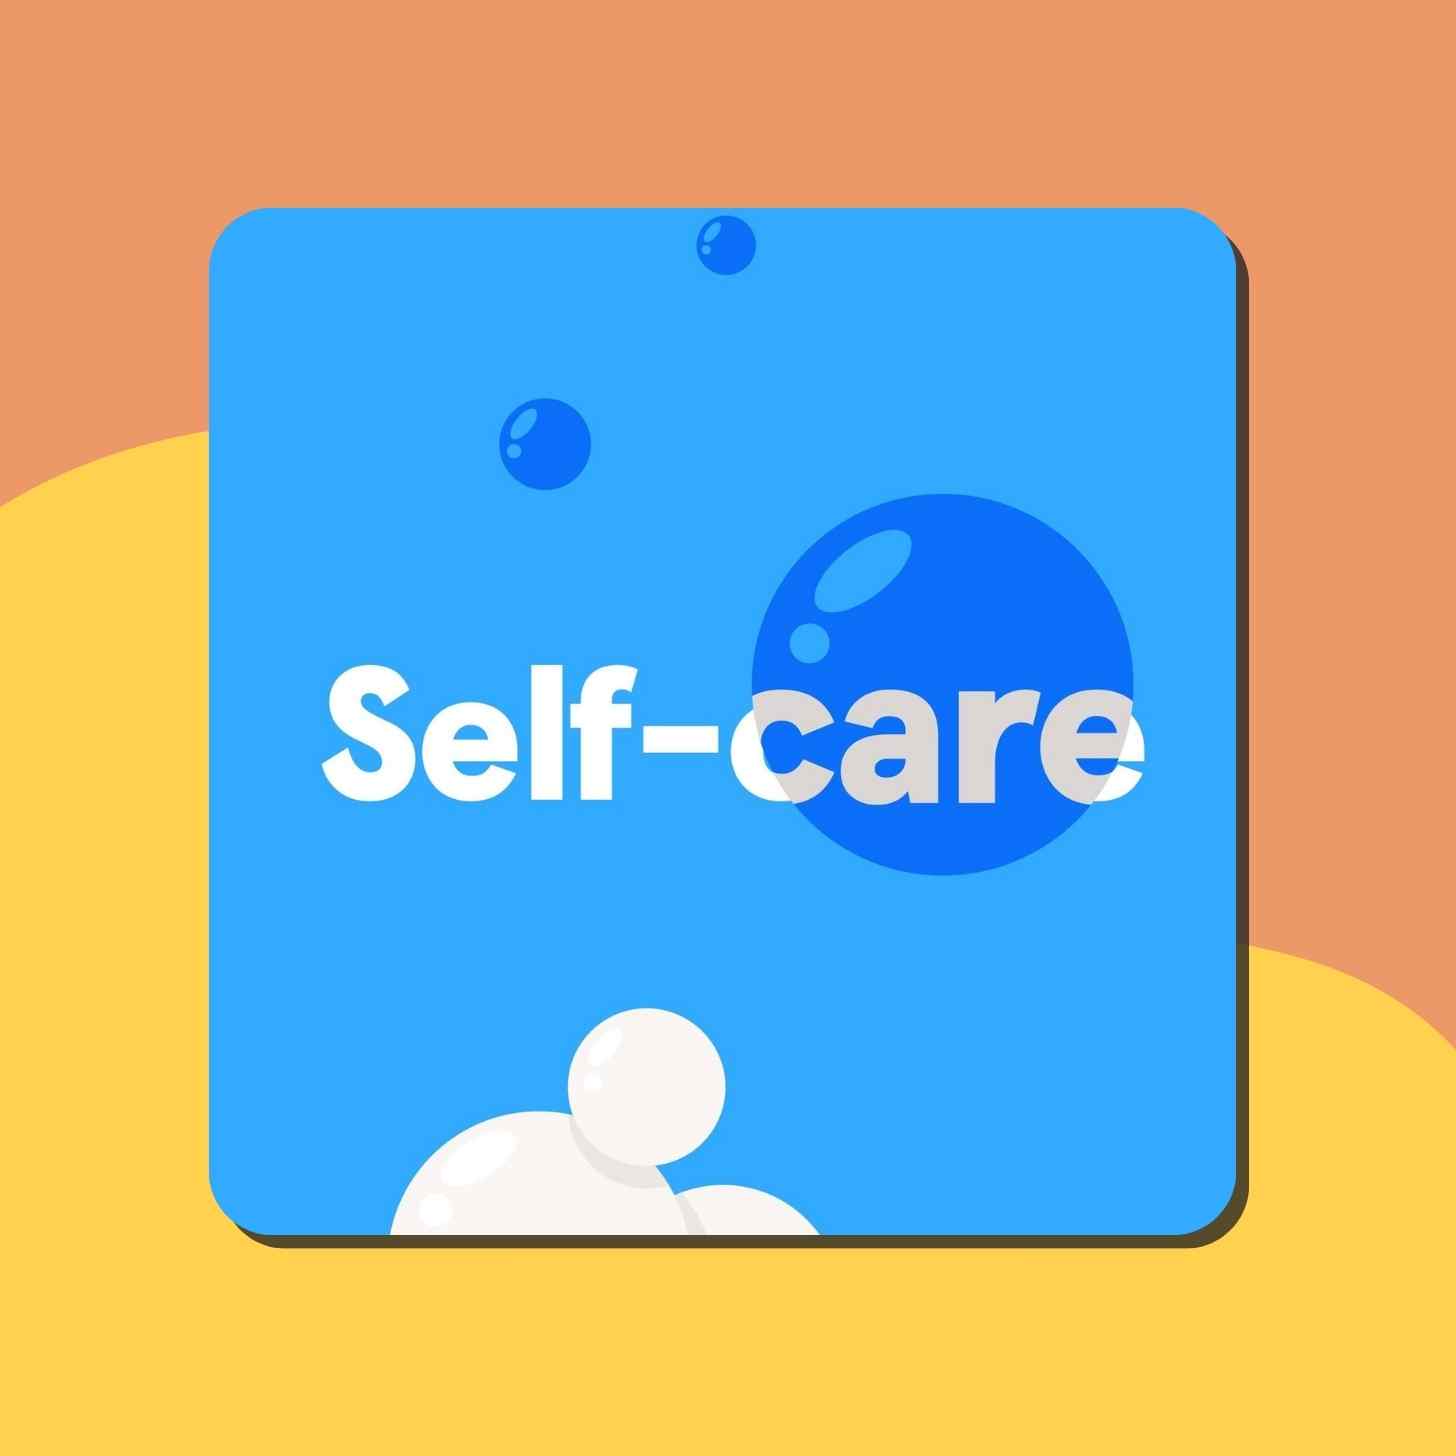 A Self-Care Headspace Image